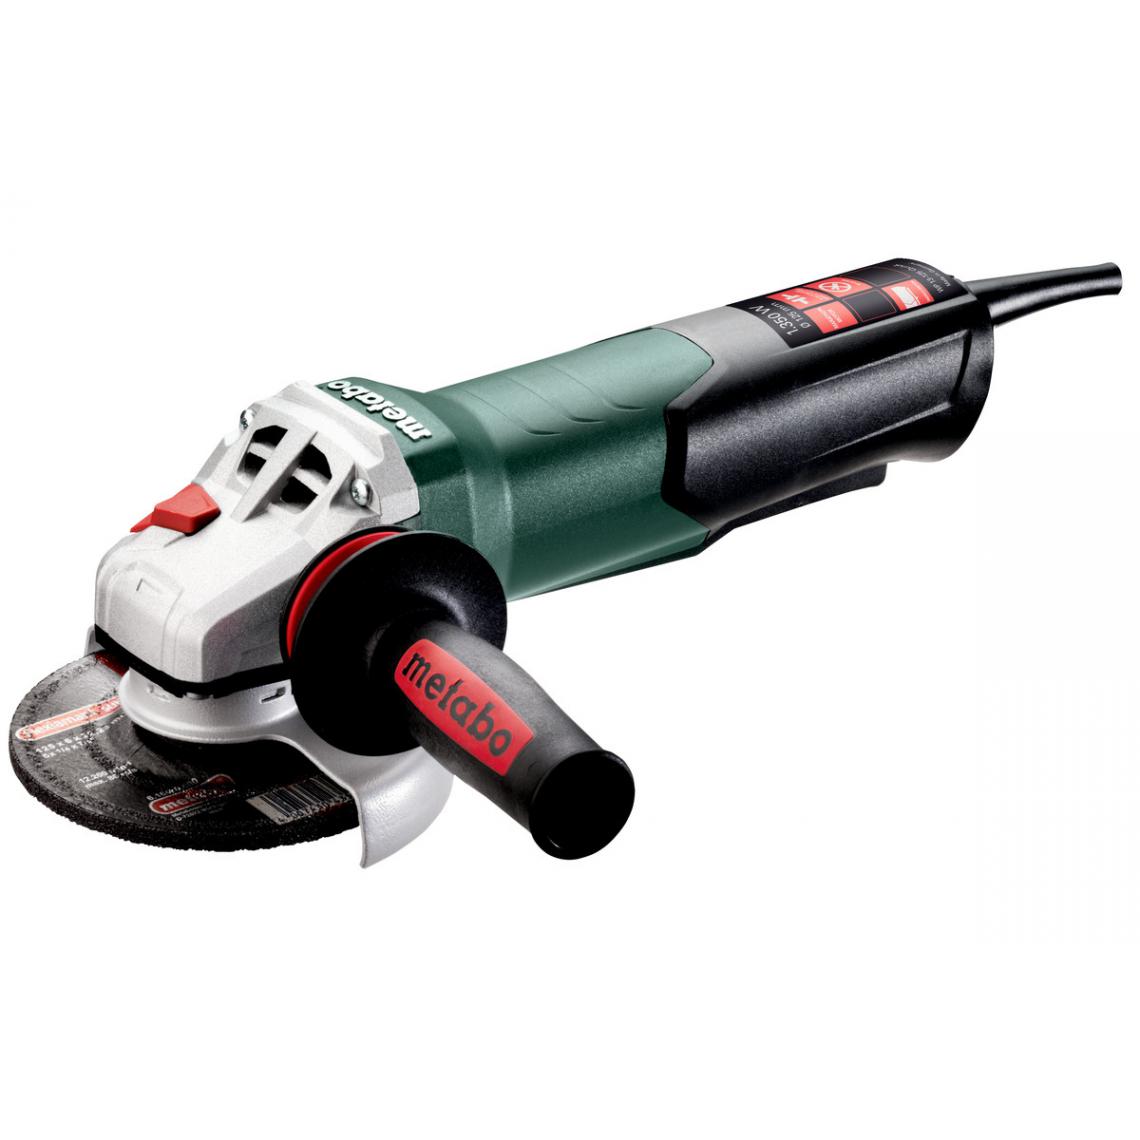 Metabo - Meuleuse Ø125 mm filaire WPB 13-125 QUICK METABO - 603631000 - Meuleuses